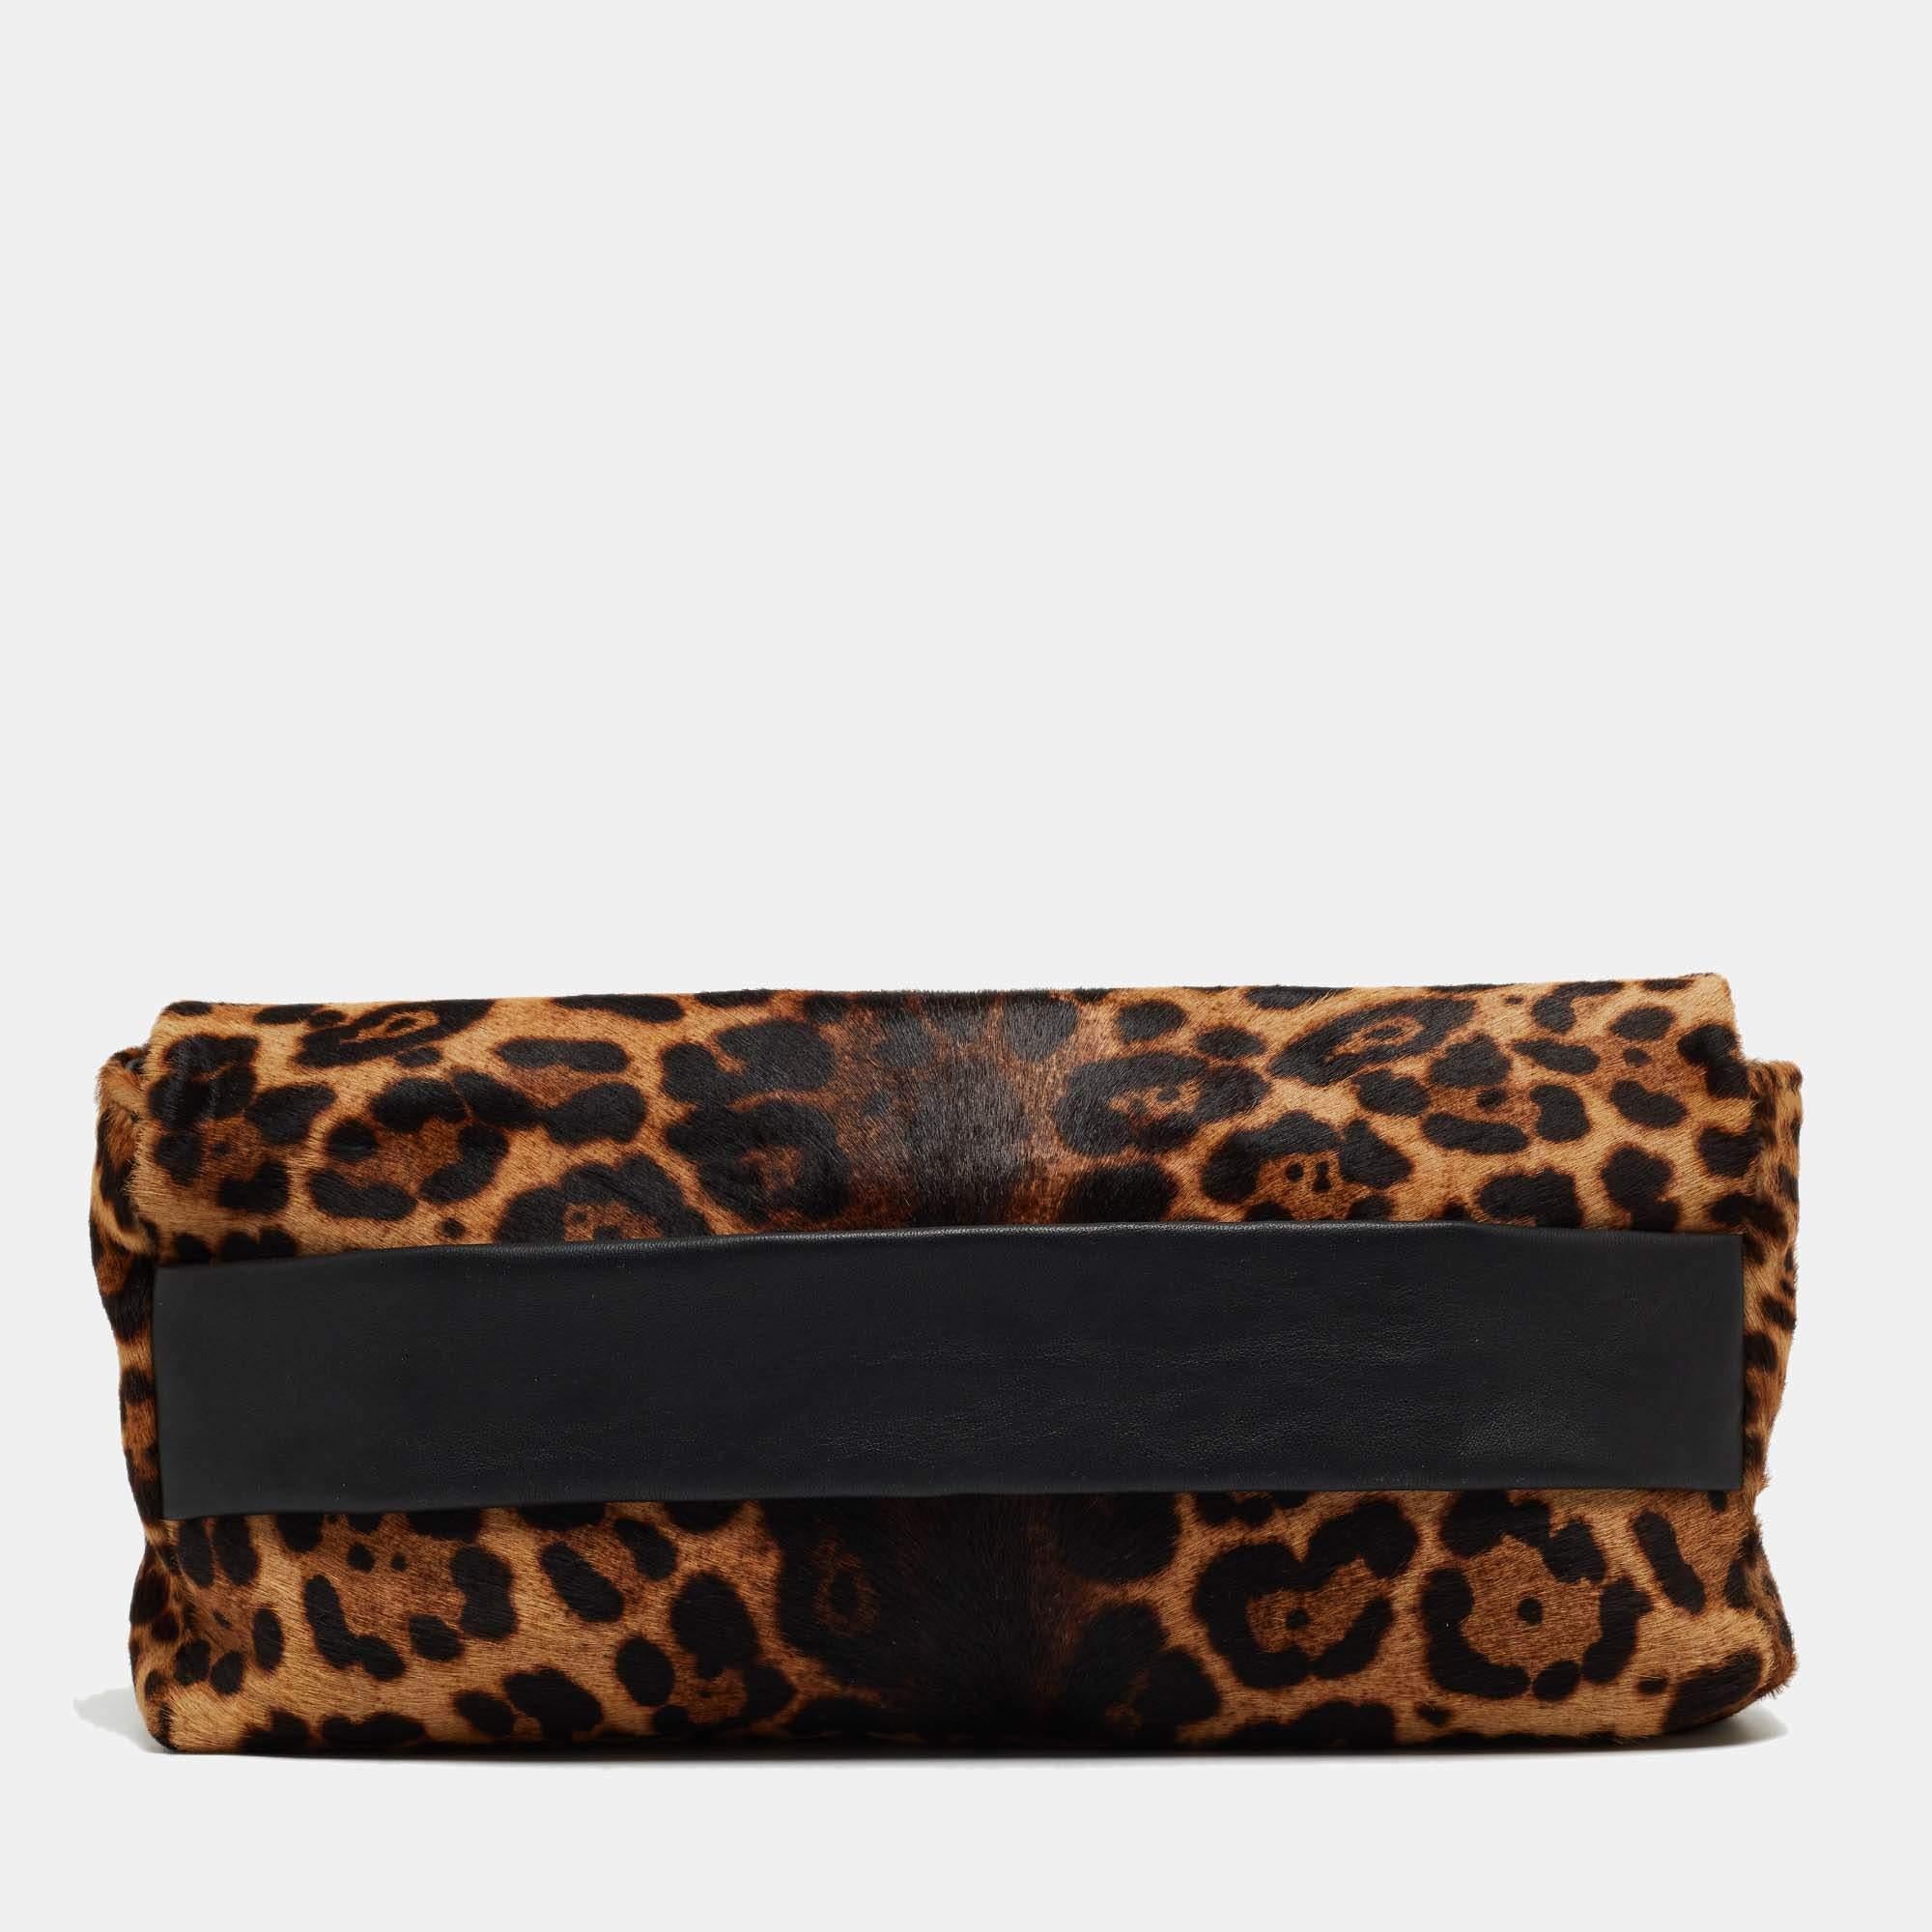 Functional and fashionable, this clutch is a classy styling choice. It is crafted from quality materials, and its lined interior will neatly keep your evening essentials.

